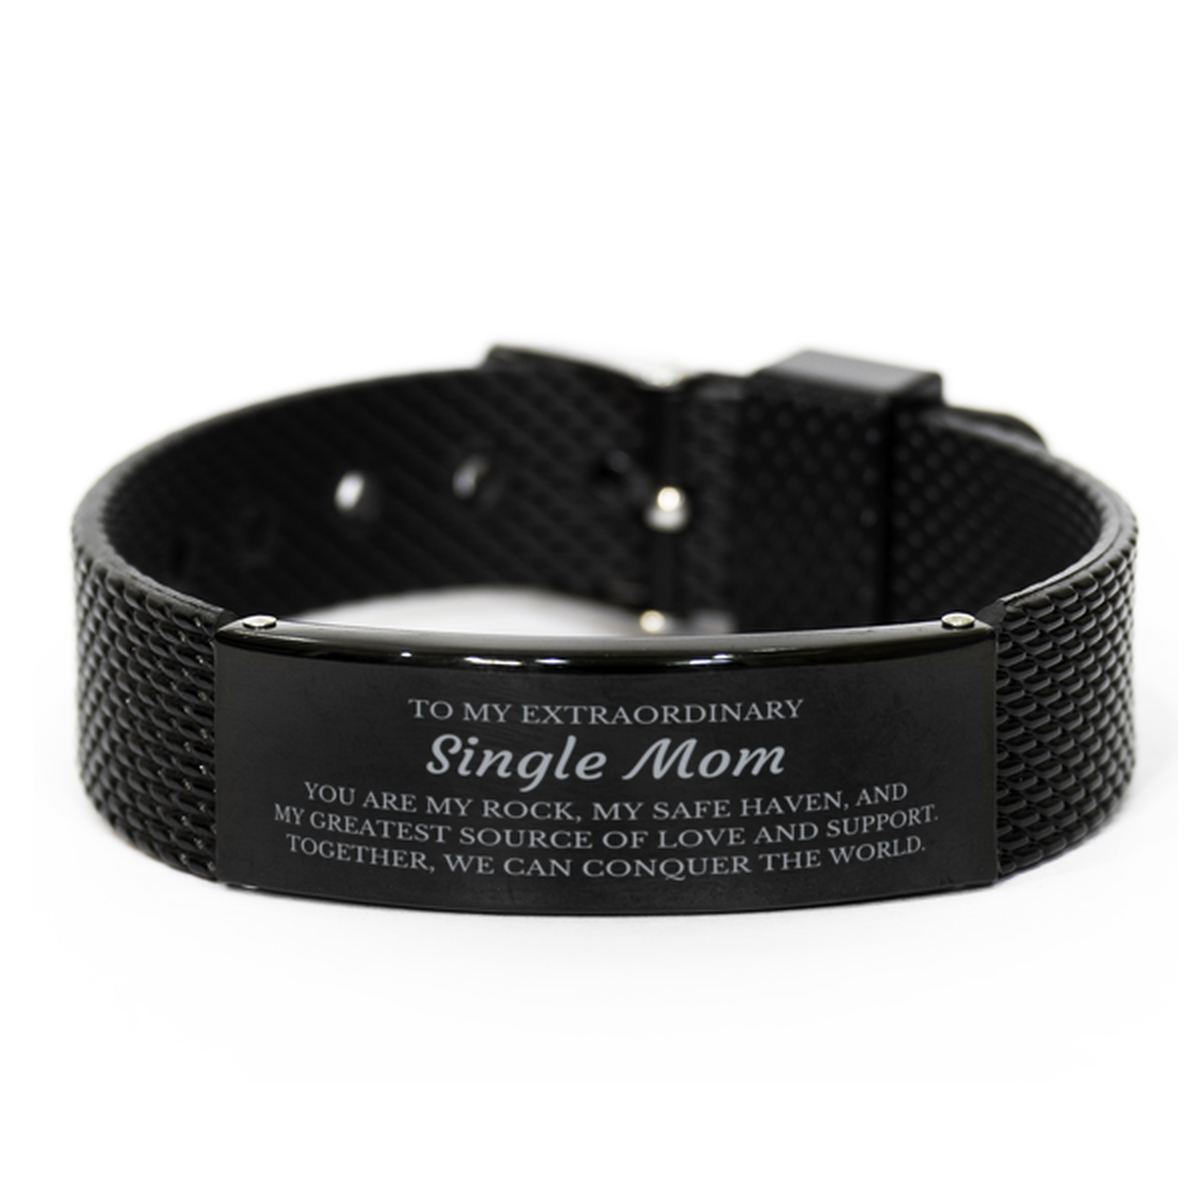 To My Extraordinary Single Mom Gifts, Together, we can conquer the world, Birthday Black Shark Mesh Bracelet For Single Mom, Christmas Gifts For Single Mom